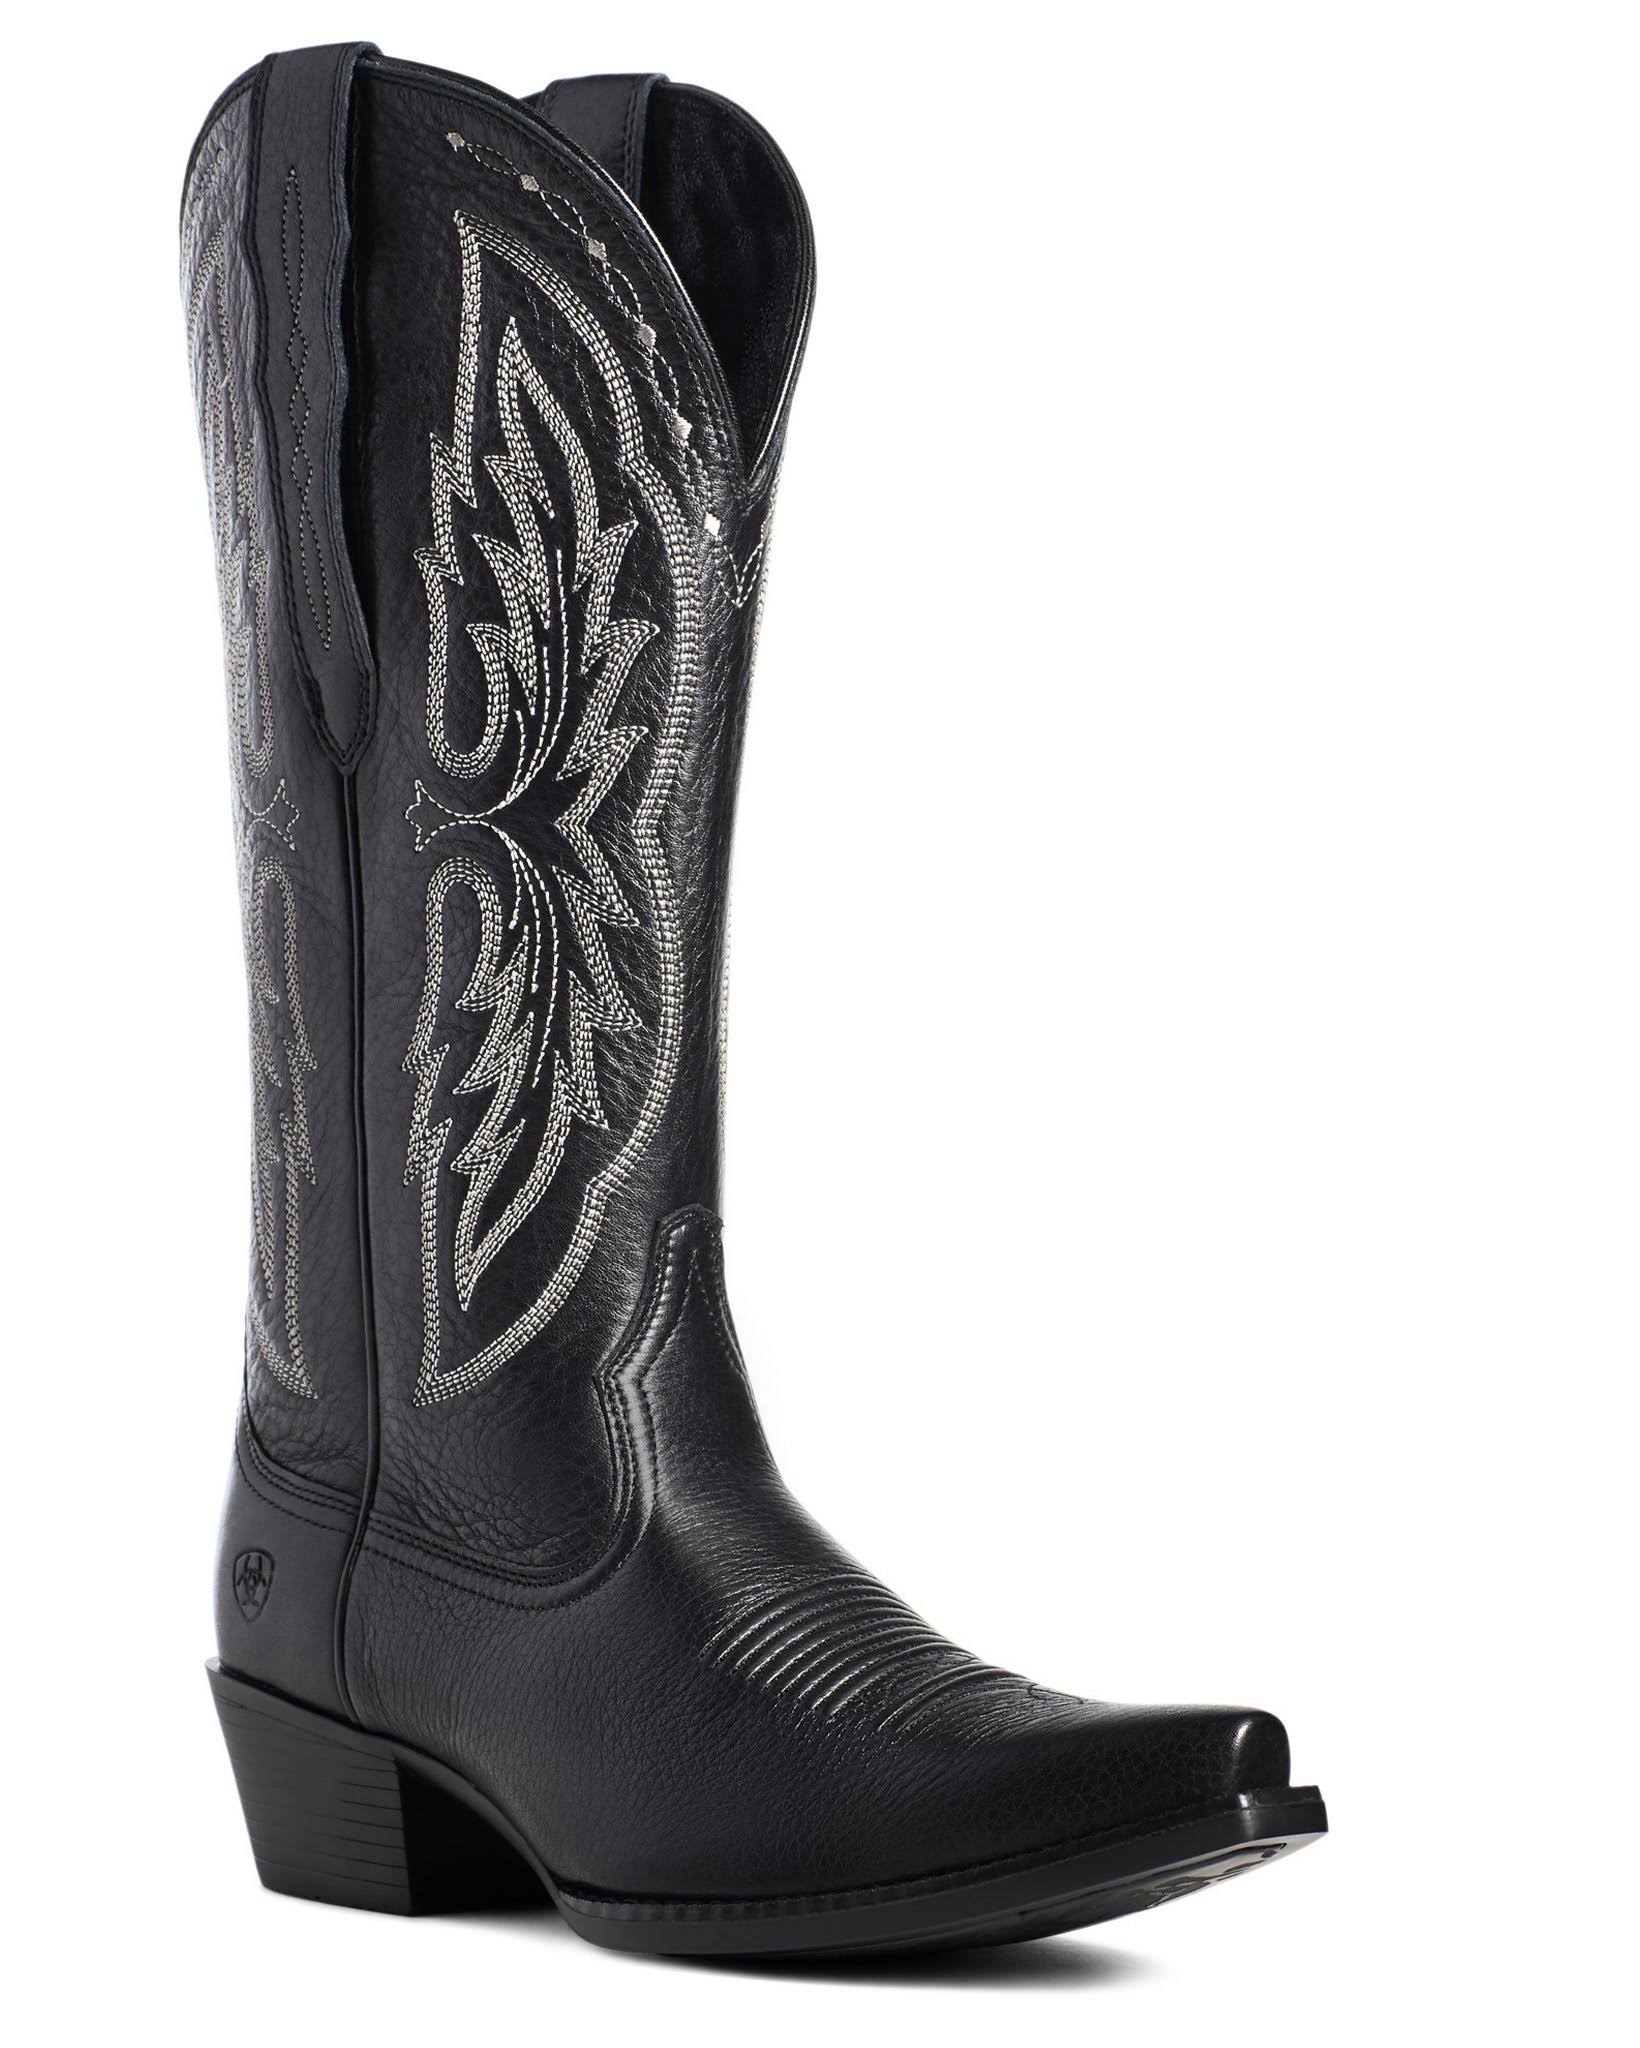 Ariat Women&s Heritage Elastic Calf Western Boots - Black - Thefalconwears